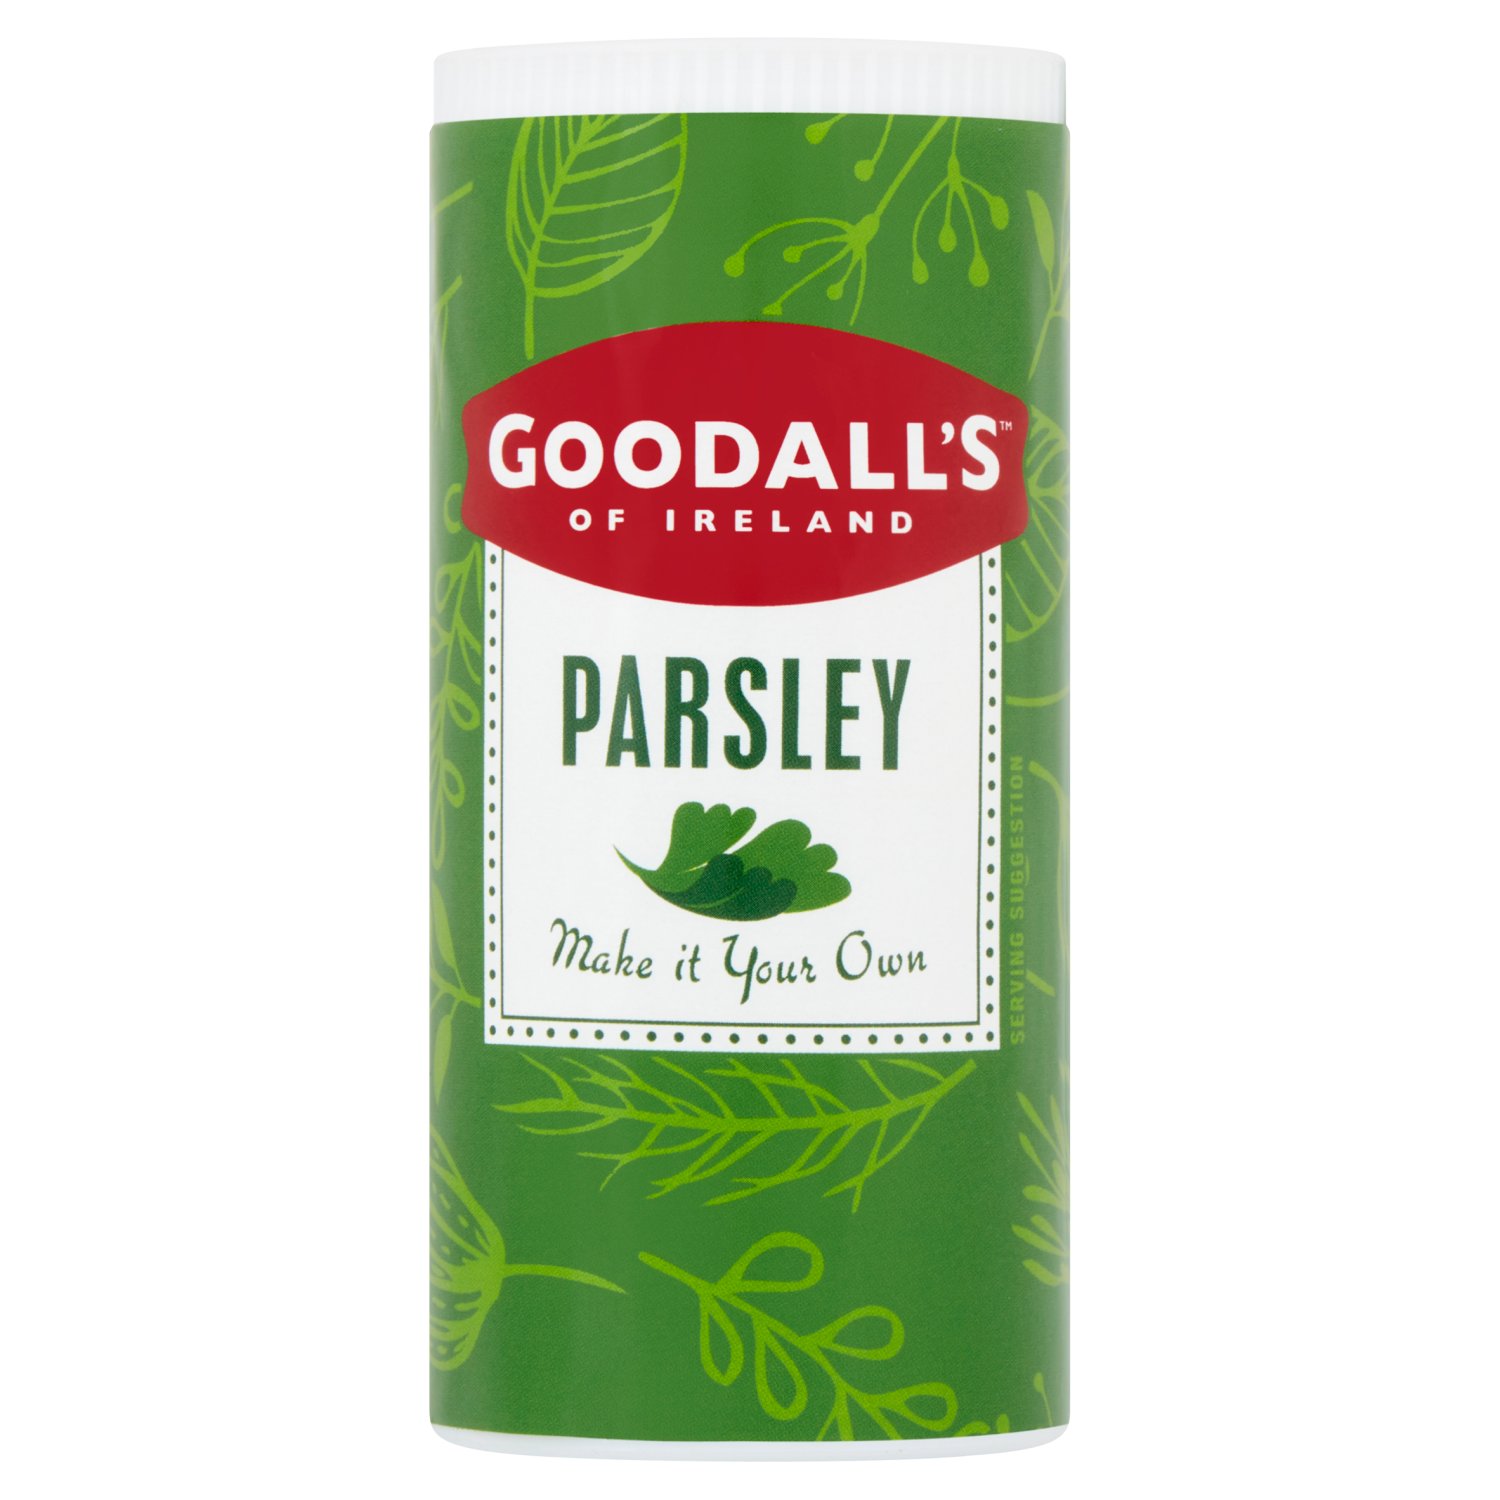 The finest dried Parsley
Parsley is a herb that can give its subtle flavour to anything from a simple summer salad to a scrummy bolognese! It's a very simple flavoured herb so be brave with it!